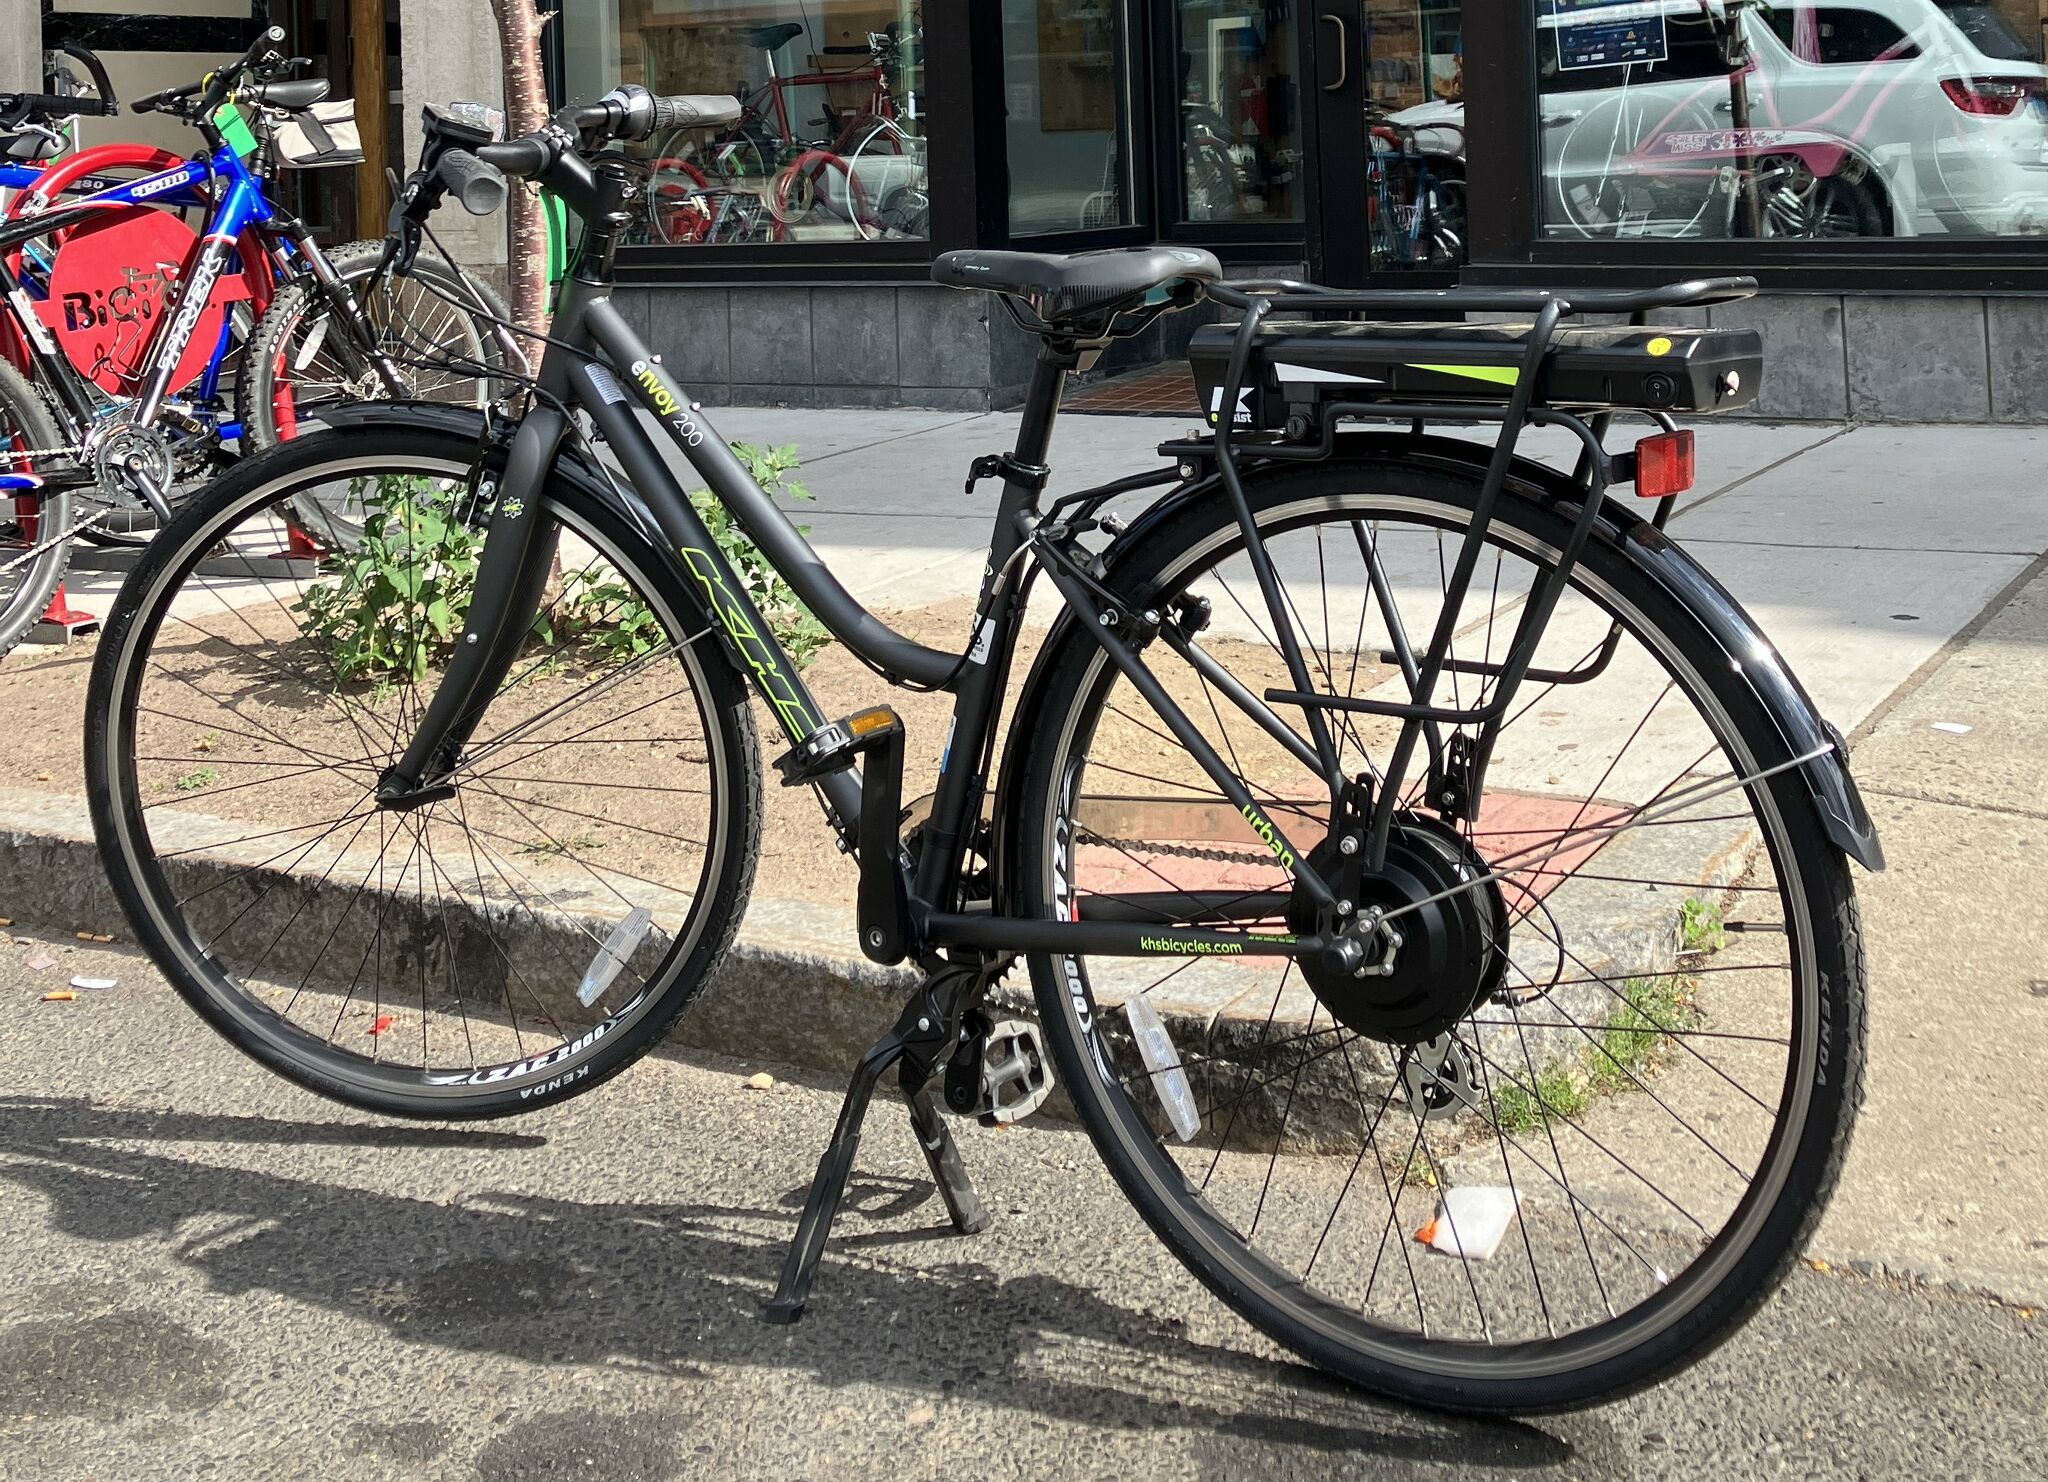 How CT Residents Can Get Up To 1 500 In Rebates For E bike Purchases